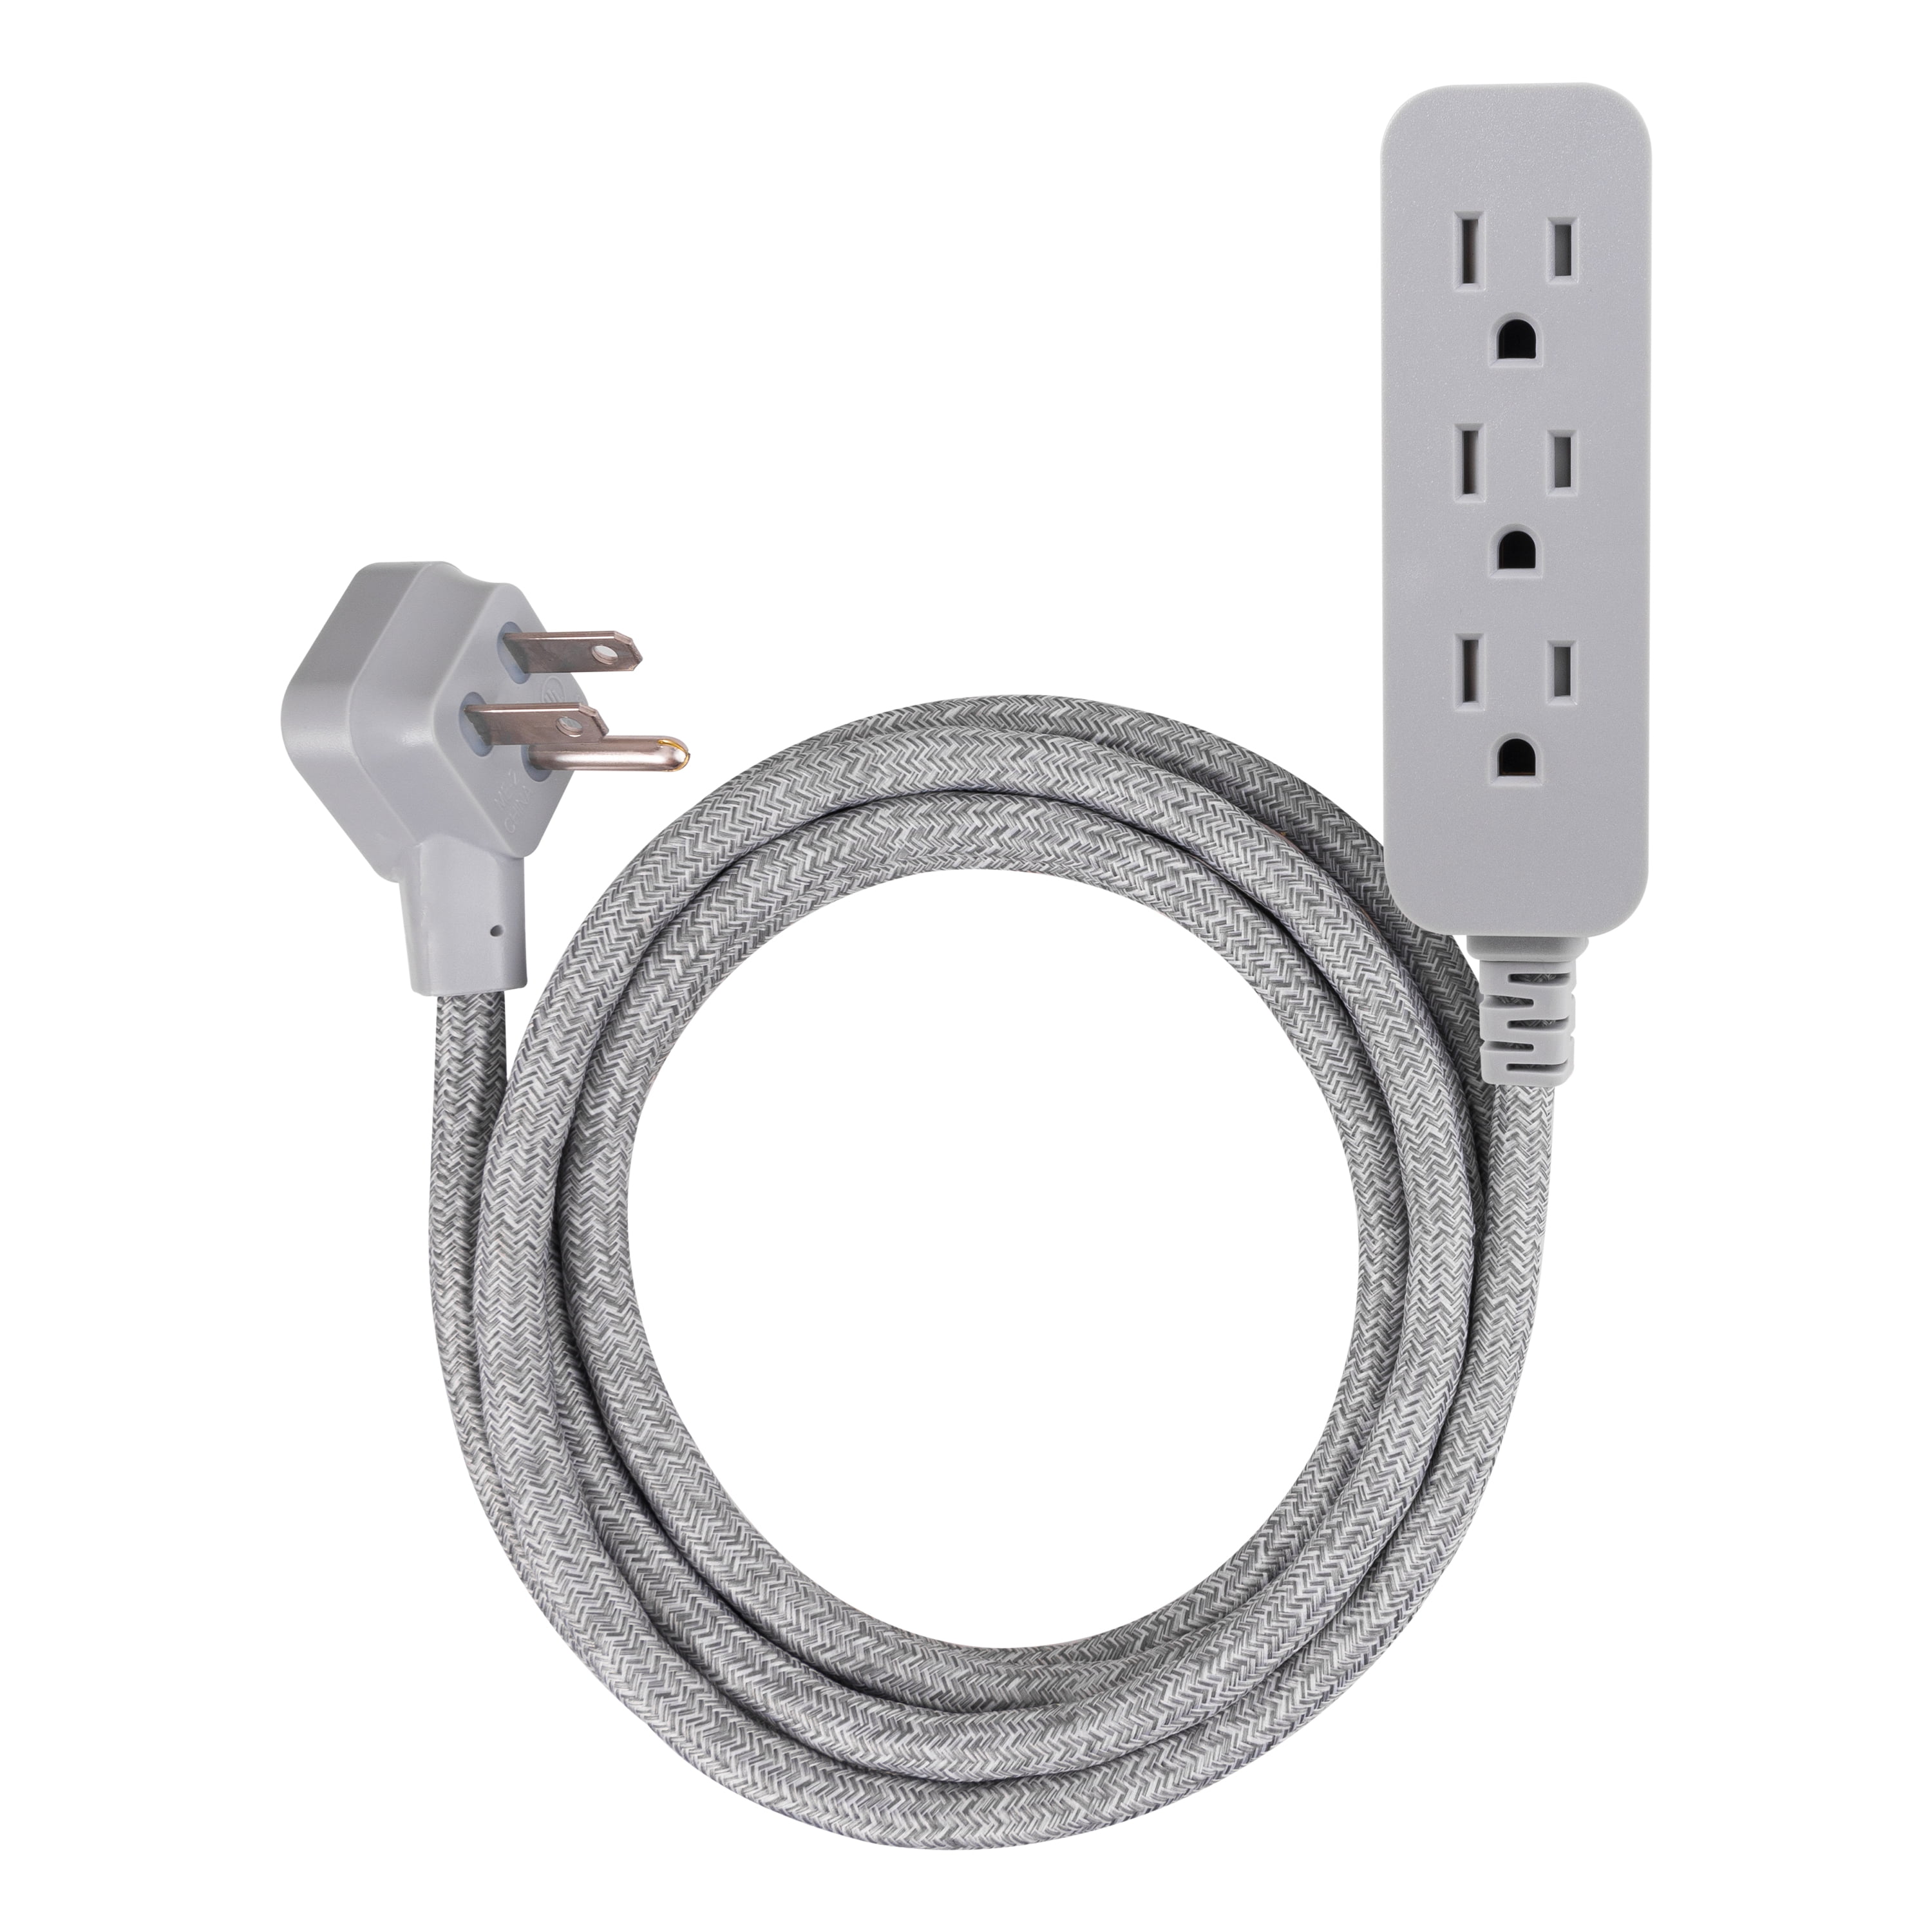 Flat Plug Heather Gray 8 ft Designer Braided Extension Cord 3 Outlet Surge Protector Power Strip 2 Pack 53252 GE 